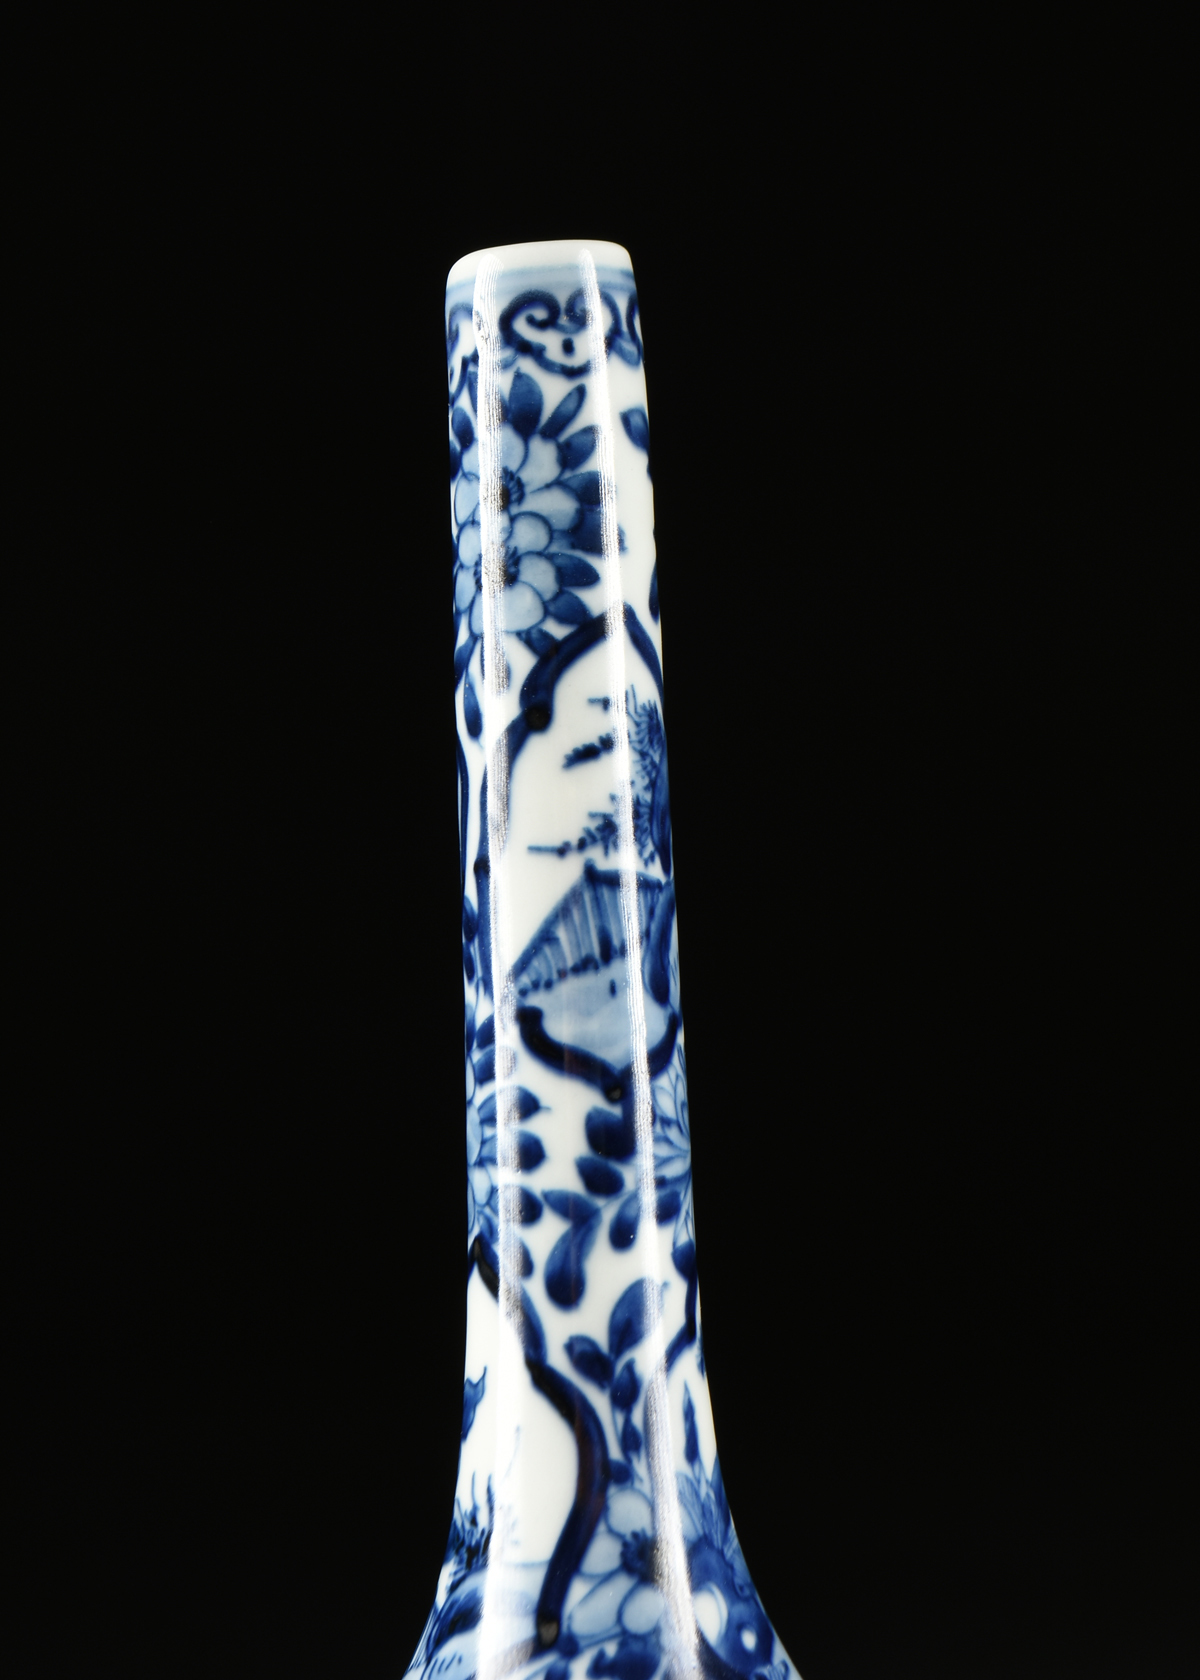 A QING DYNASTY BLUE AND WHITE PORCELAIN BOTTLE VASE, SHIPWRECK ARTIFACT, ATTRIBUTED TO THE KANGXI - Image 2 of 8